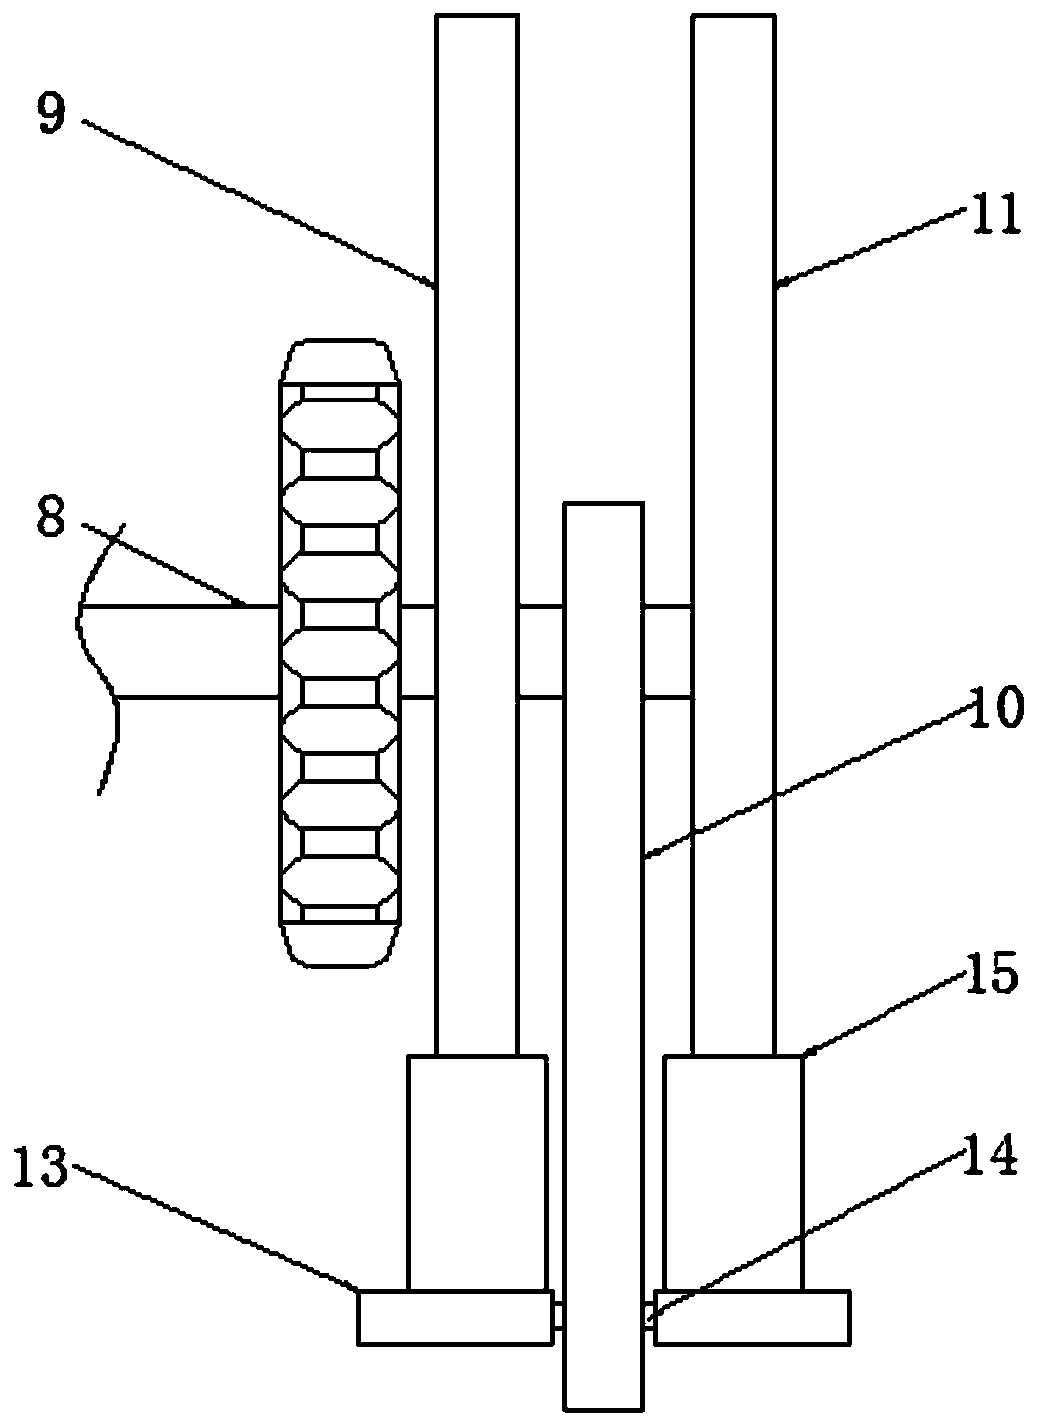 Road ice breaking device capable of vertically reciprocating